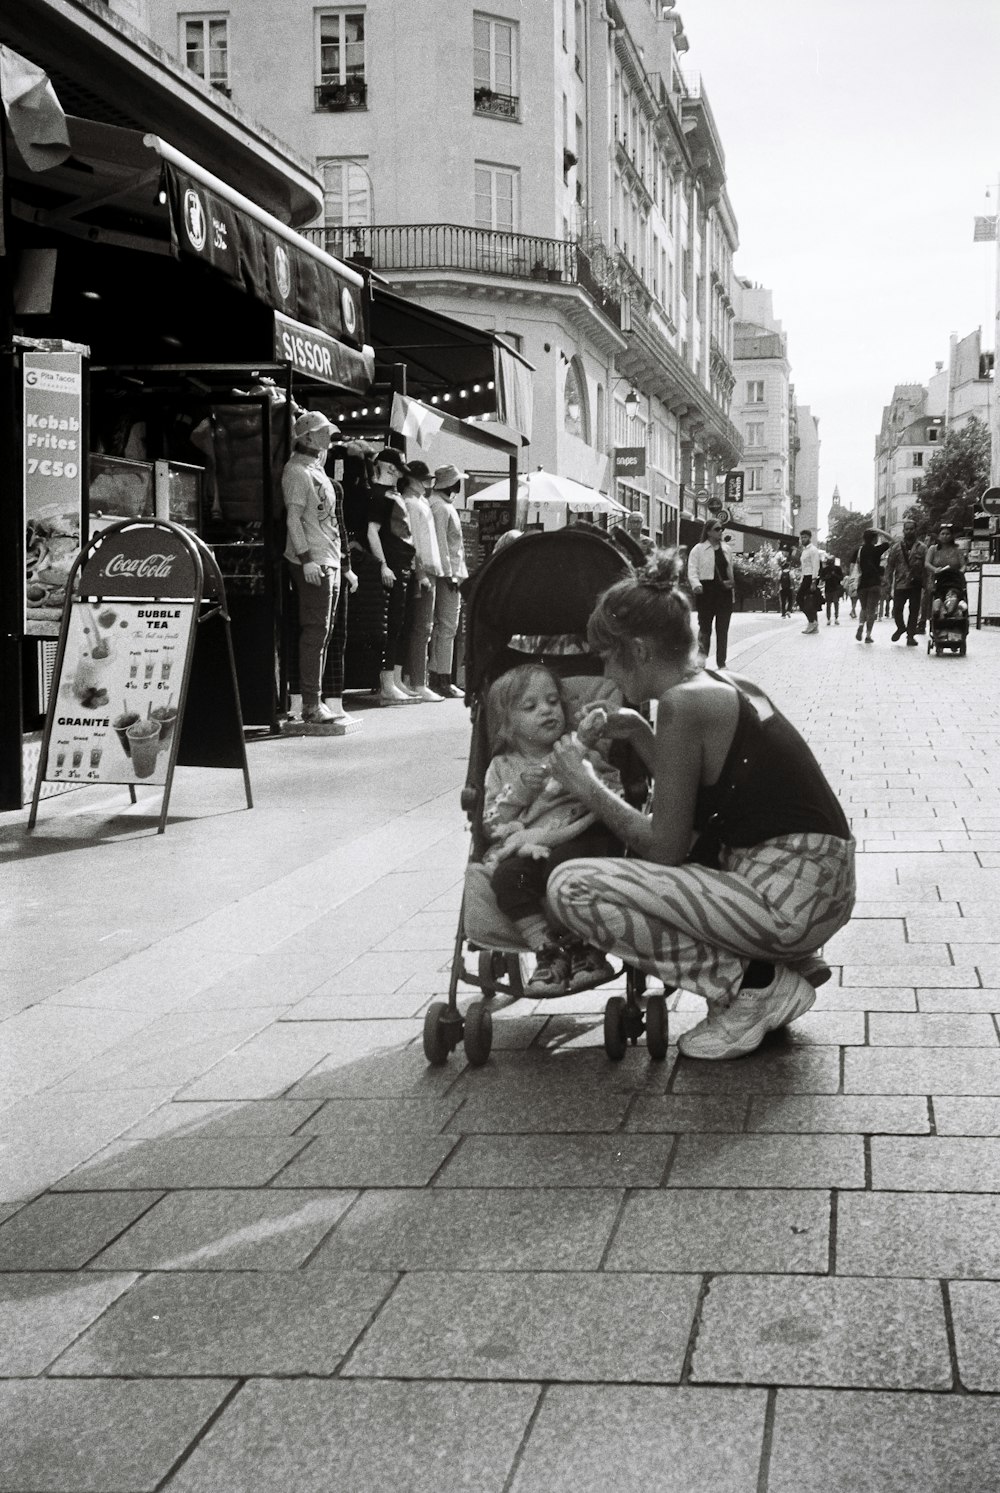 a woman kneeling down next to a baby in a stroller